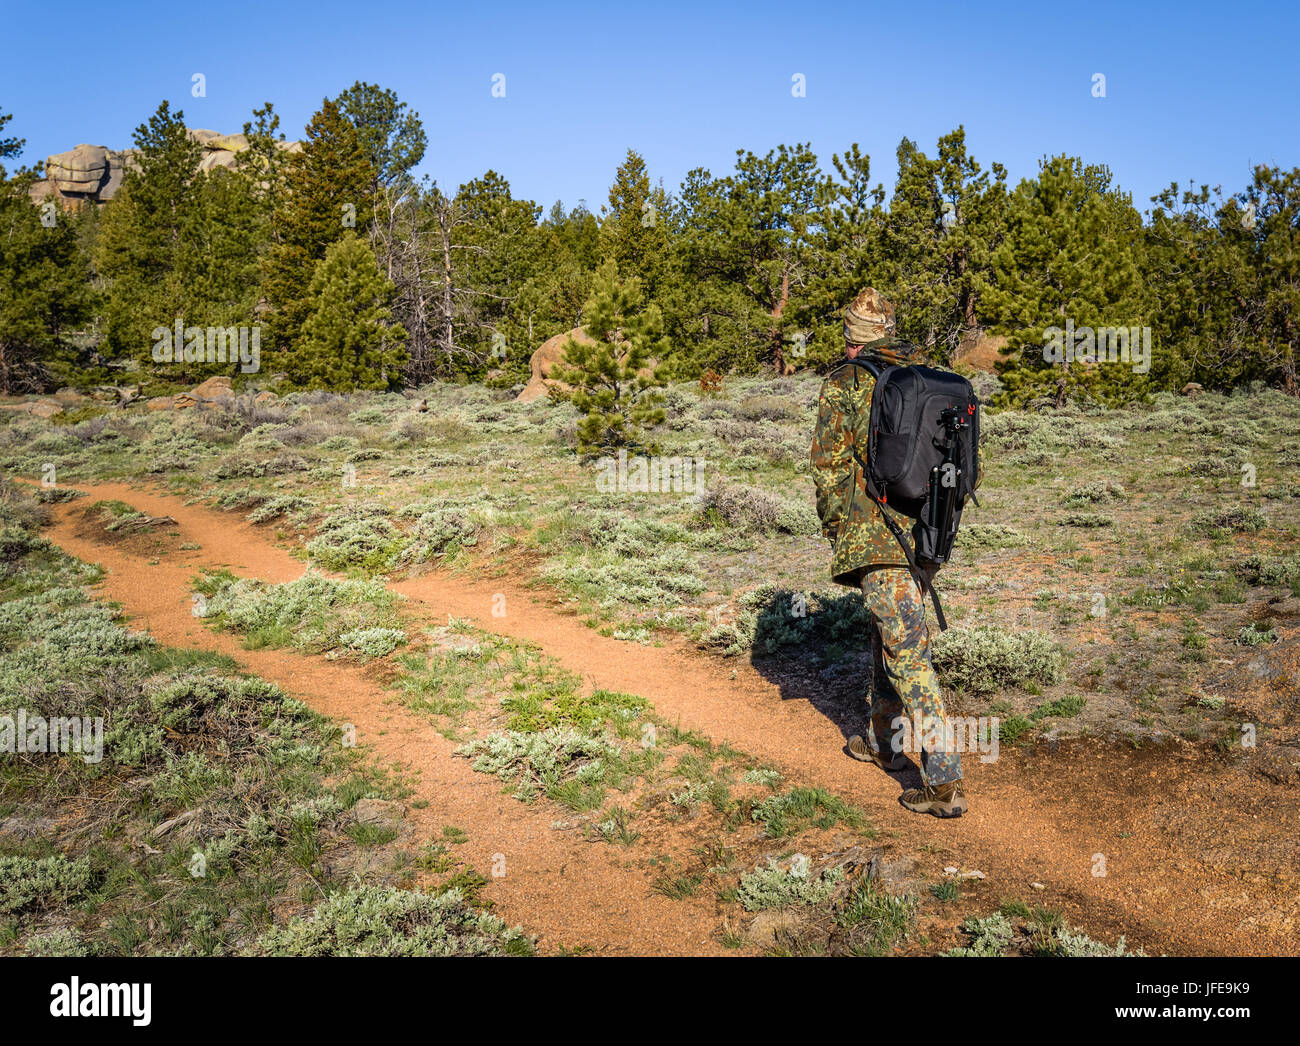 A man hiking in camouflage outfit discovering nature in the forest with DSLR photo camera, lenses, tripod in the backpack. Travel photography lifestyl Stock Photo